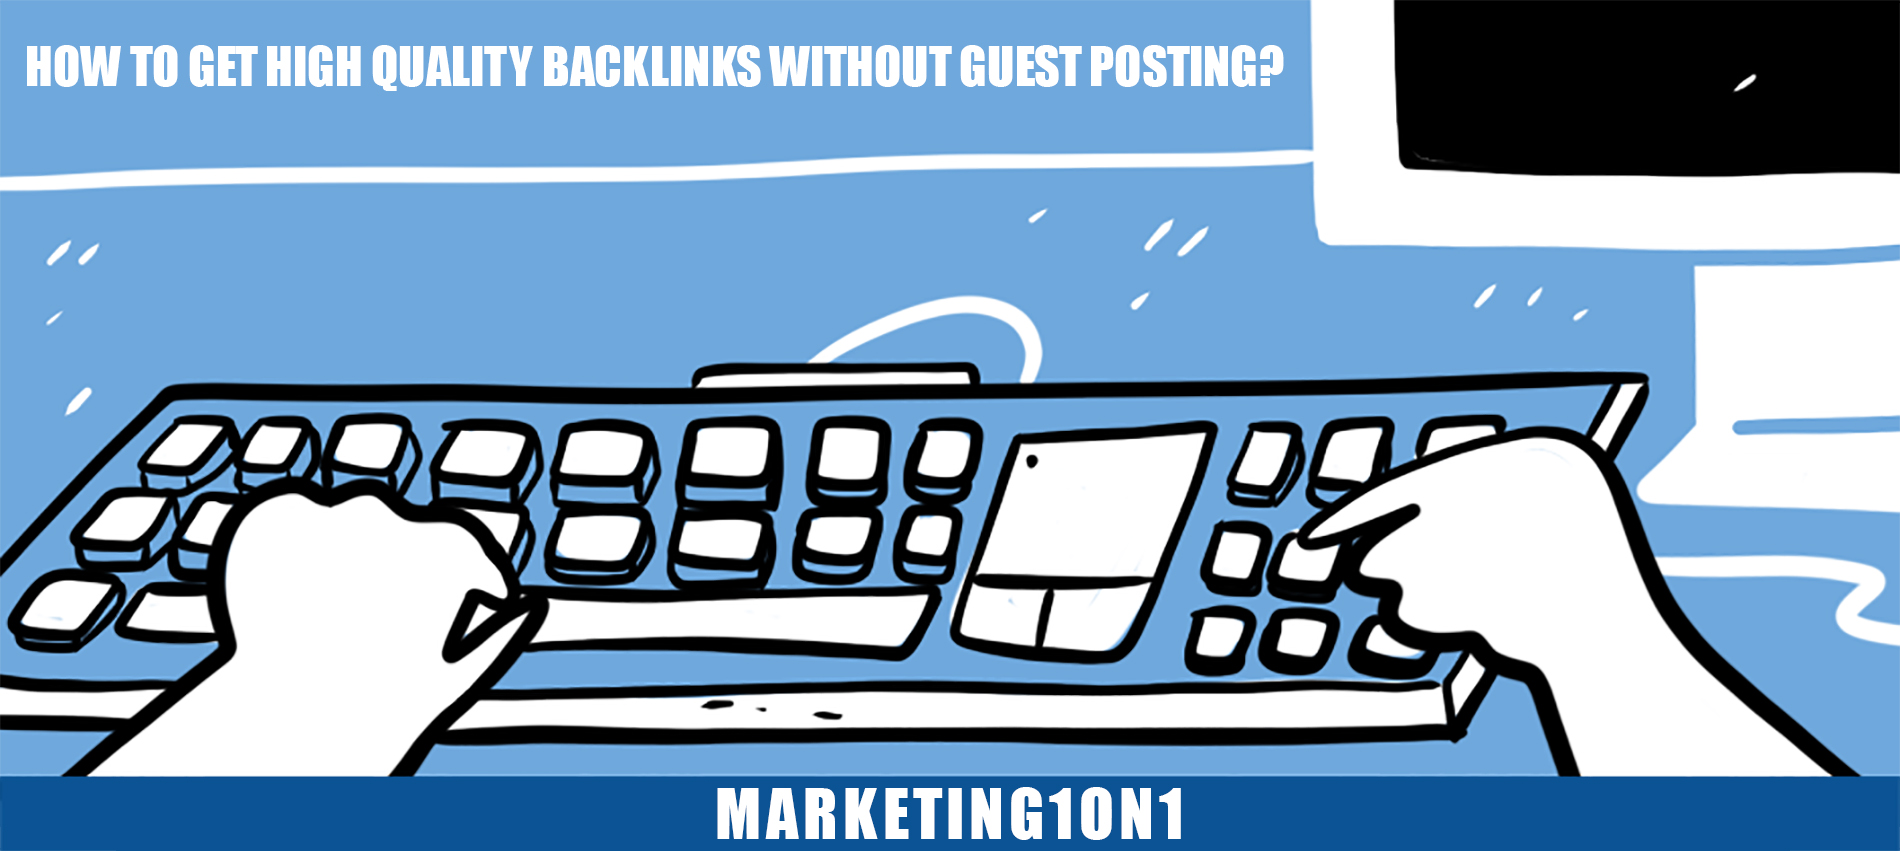 How to get high quality backlinks without guest posting?